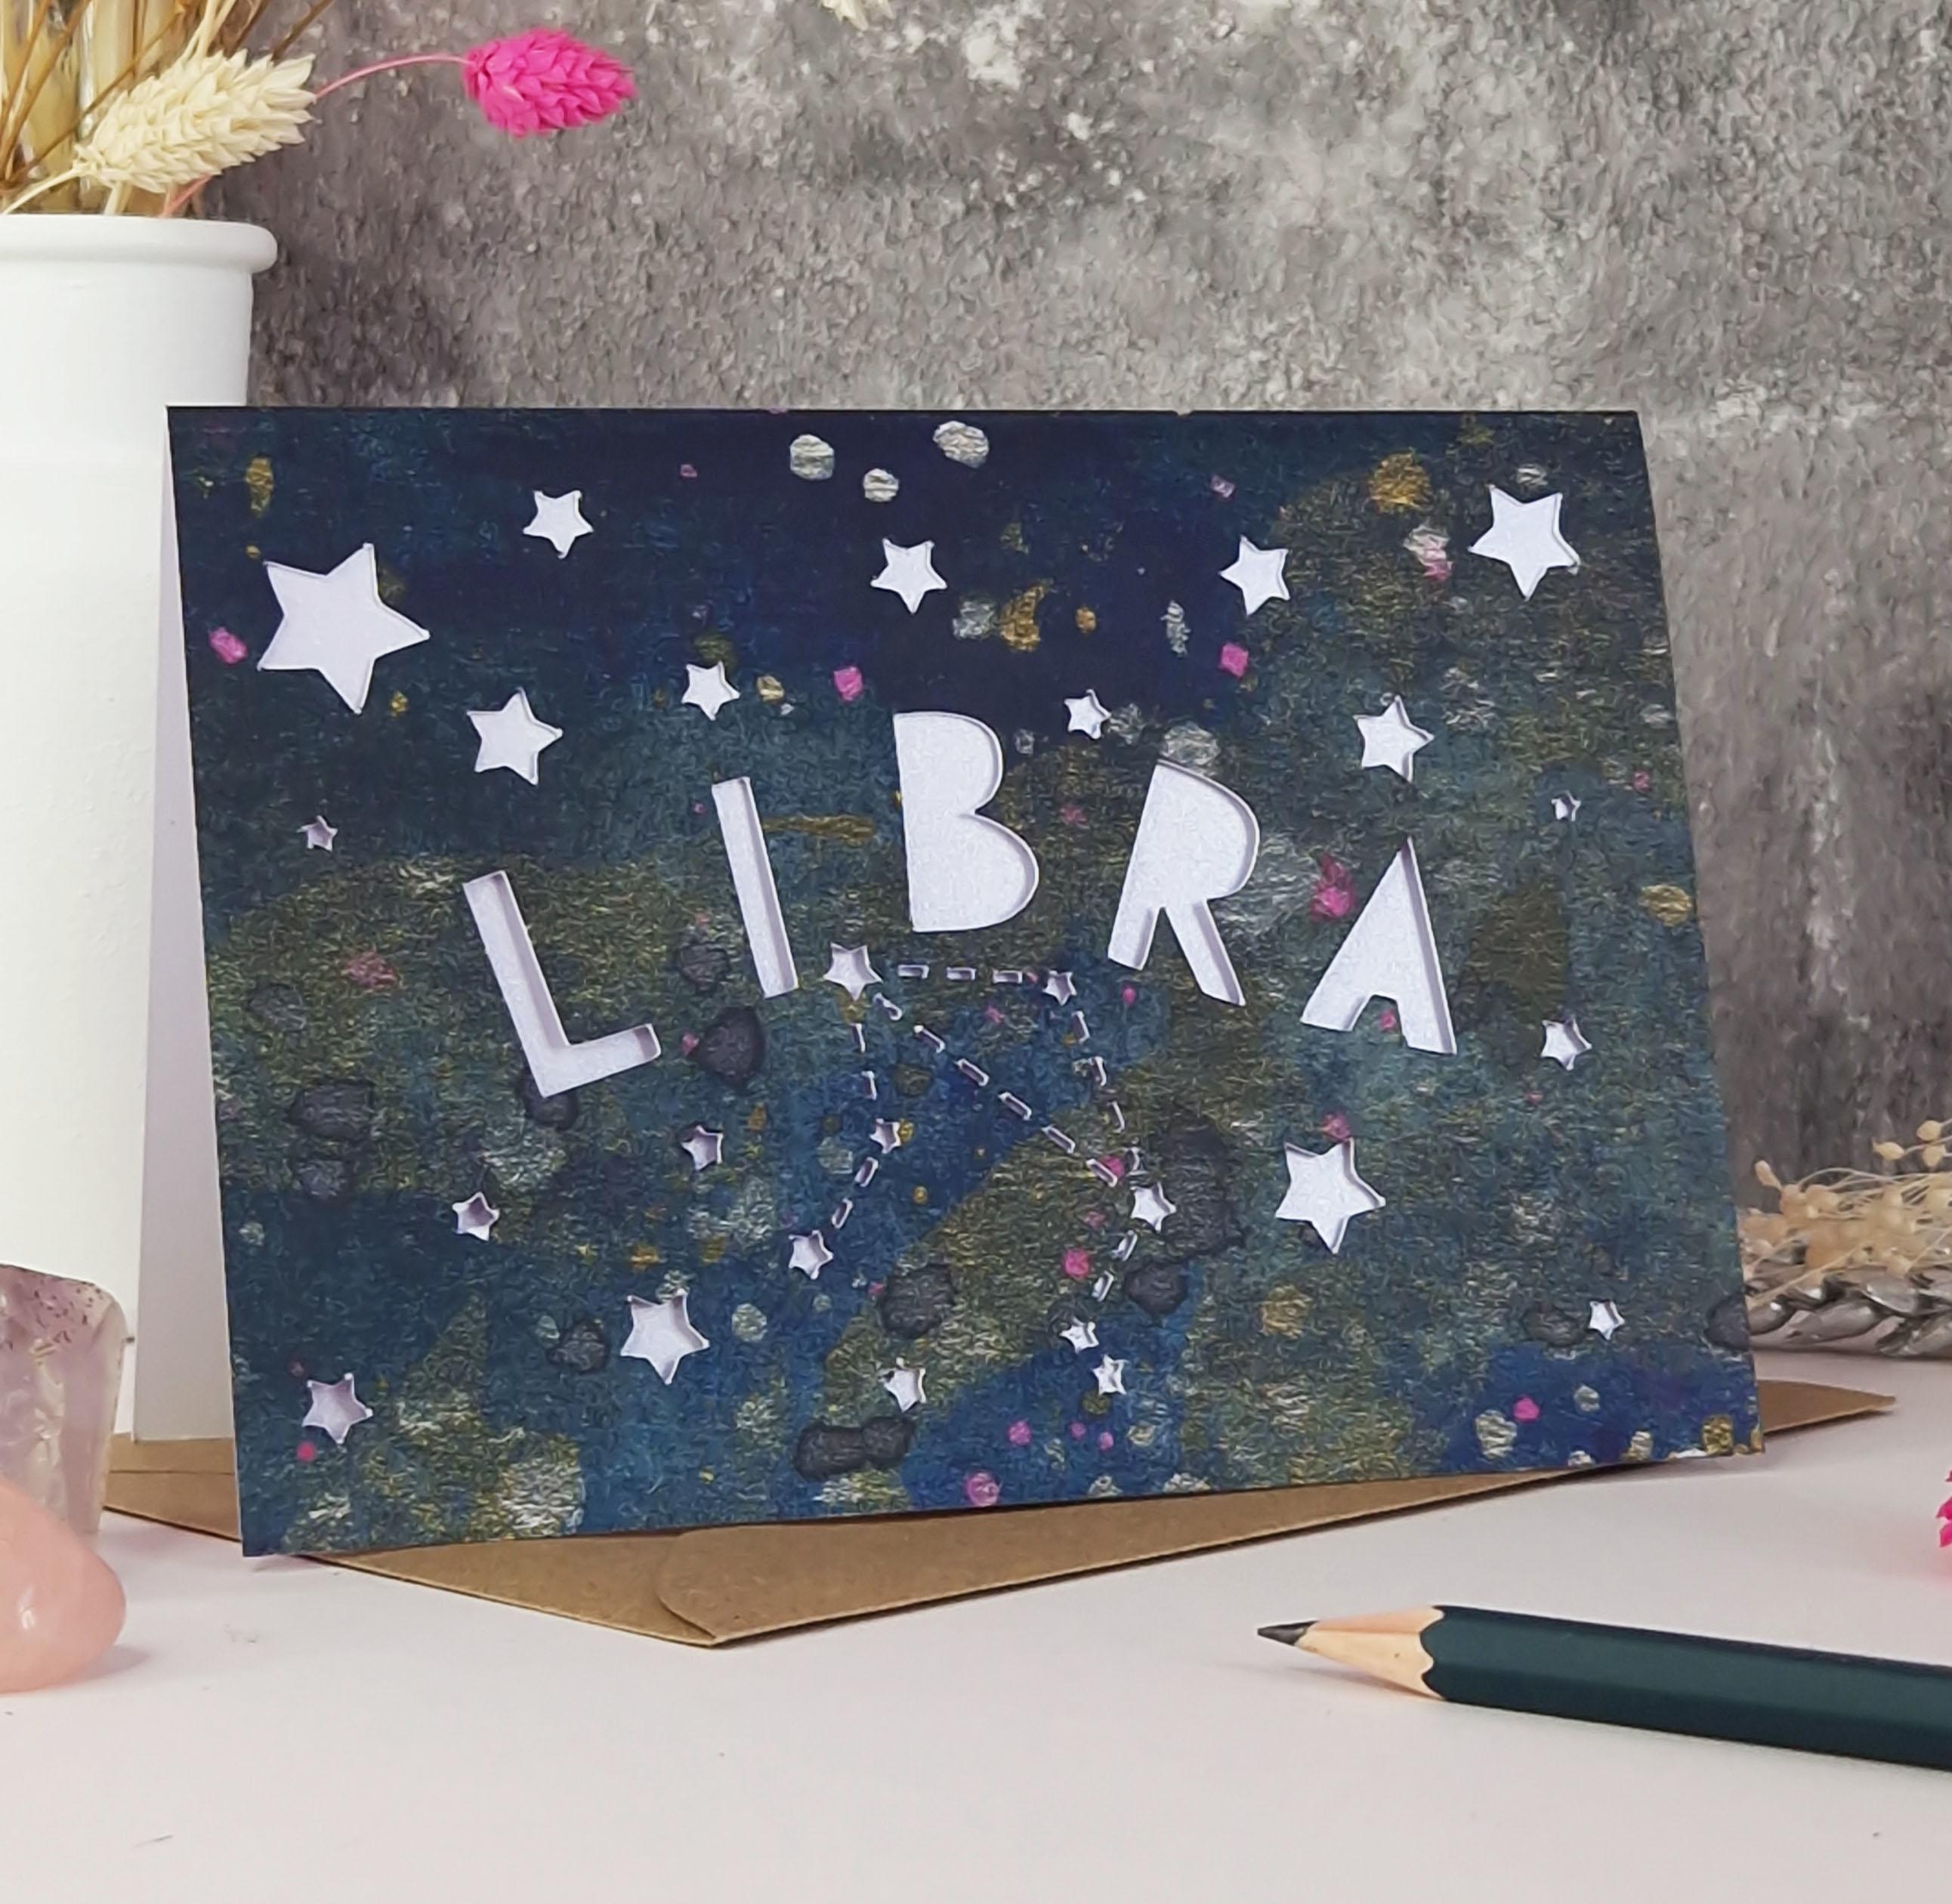 Midnight Blue printed card with papercut text that says 'Libra' and a lilac pearl liner